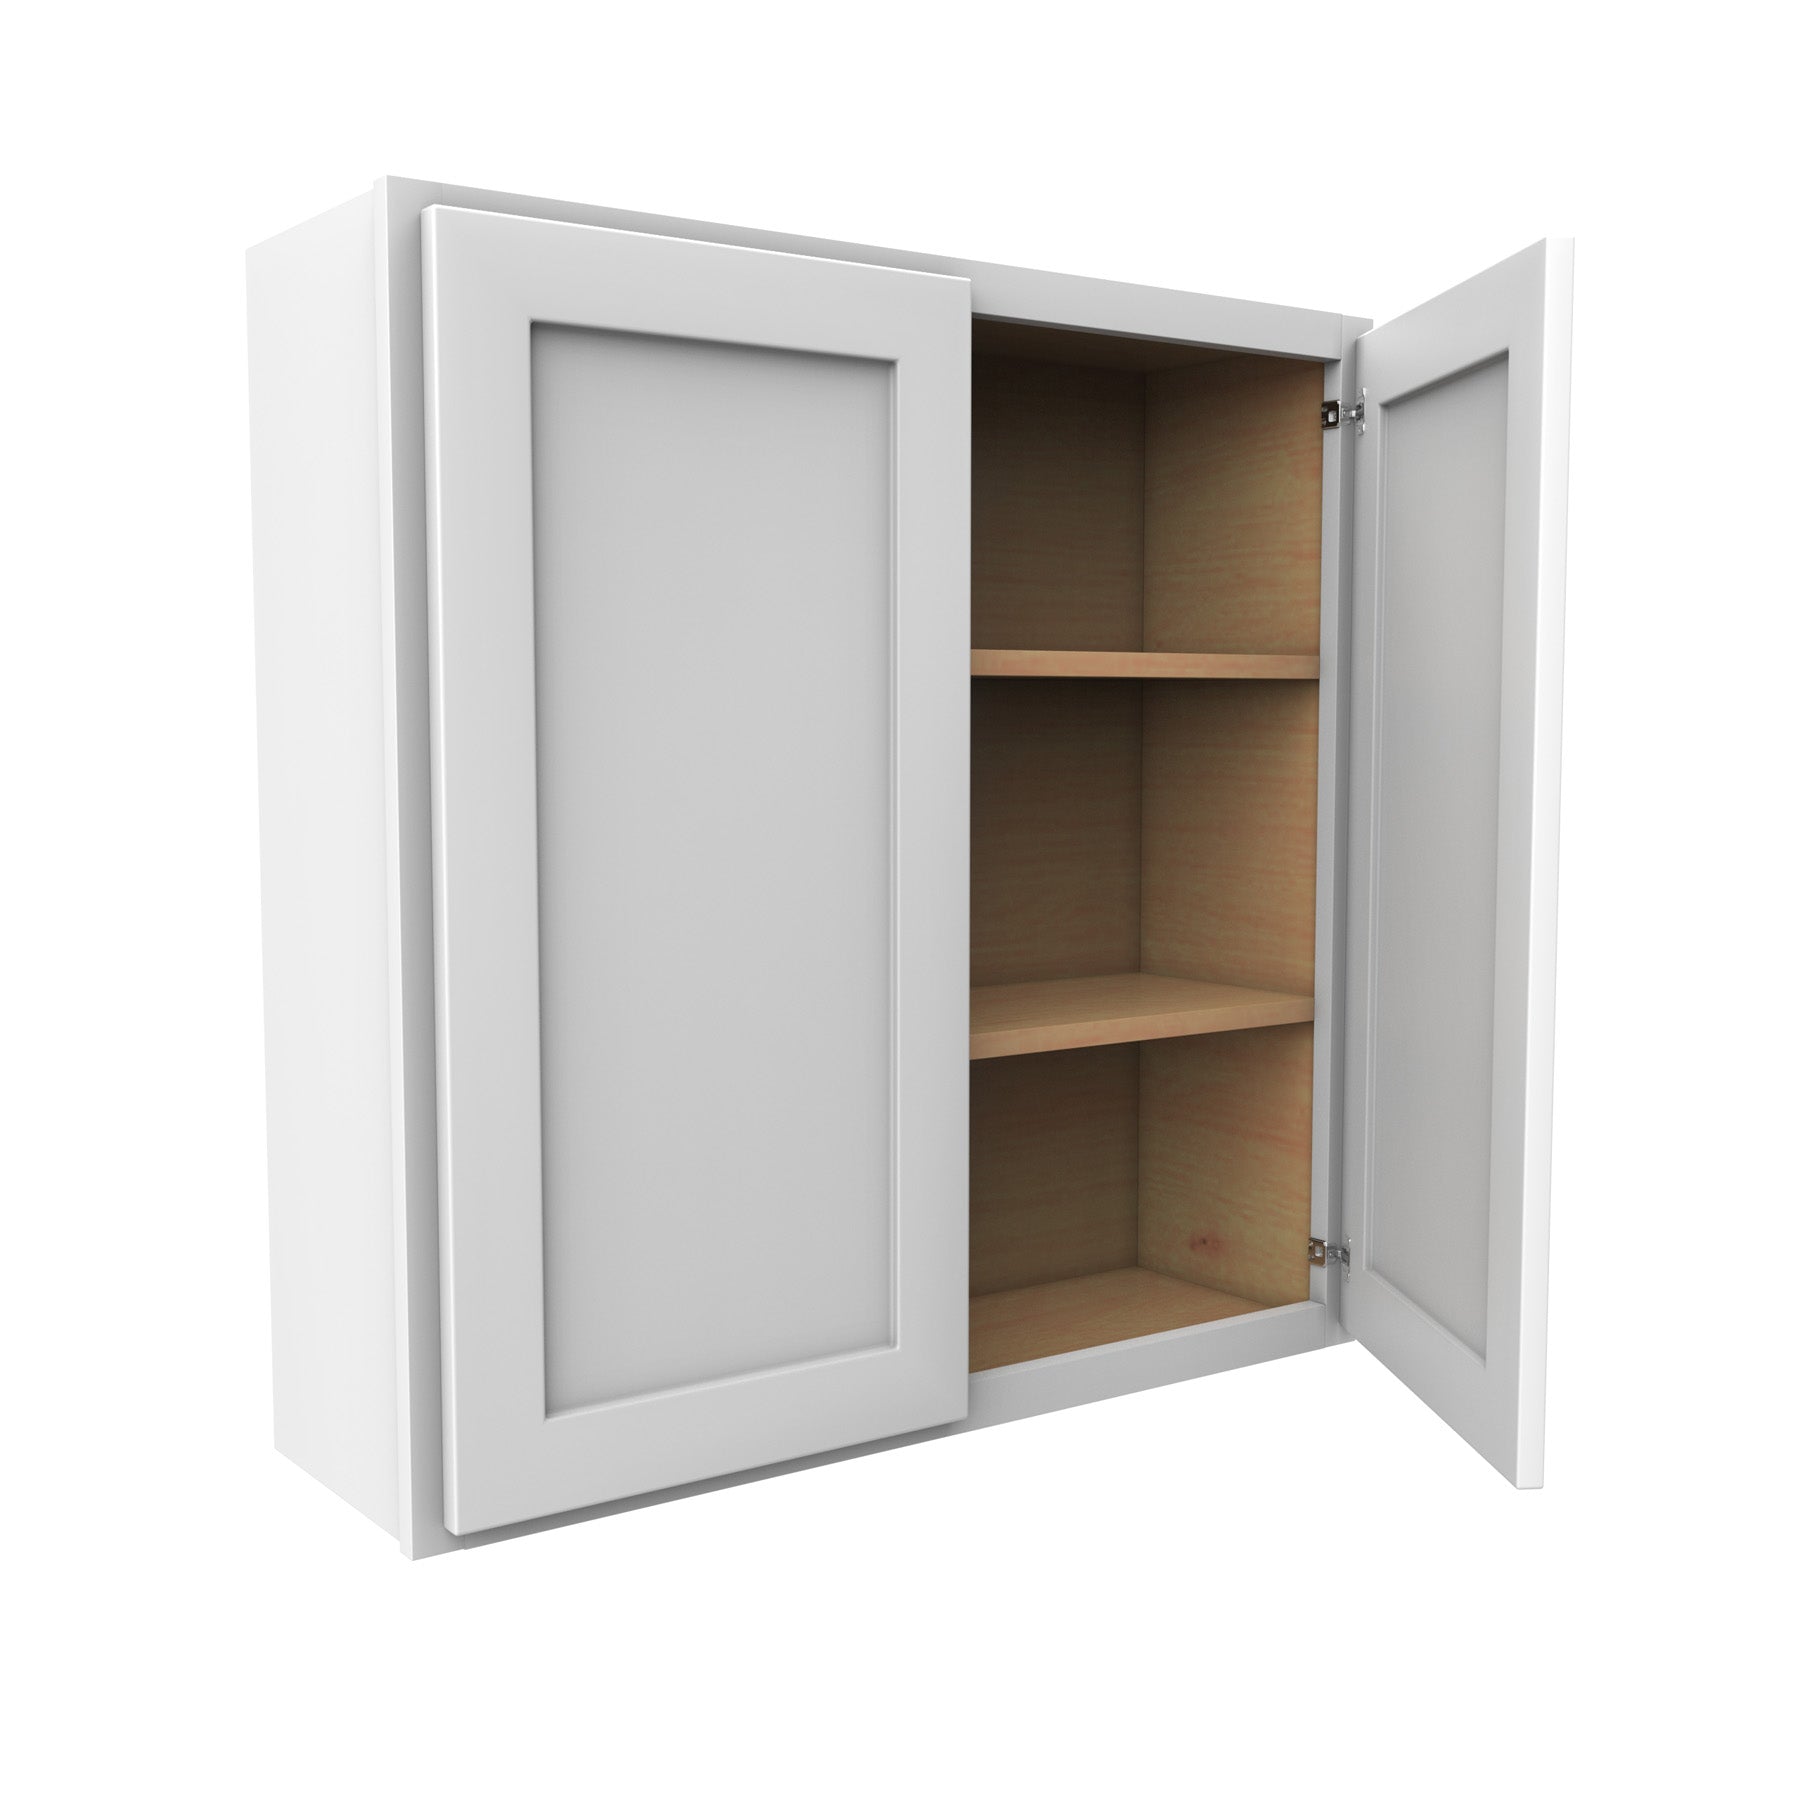 Luxor White - Double Door Wall Cabinet | 36"W x 36"H x 12"D